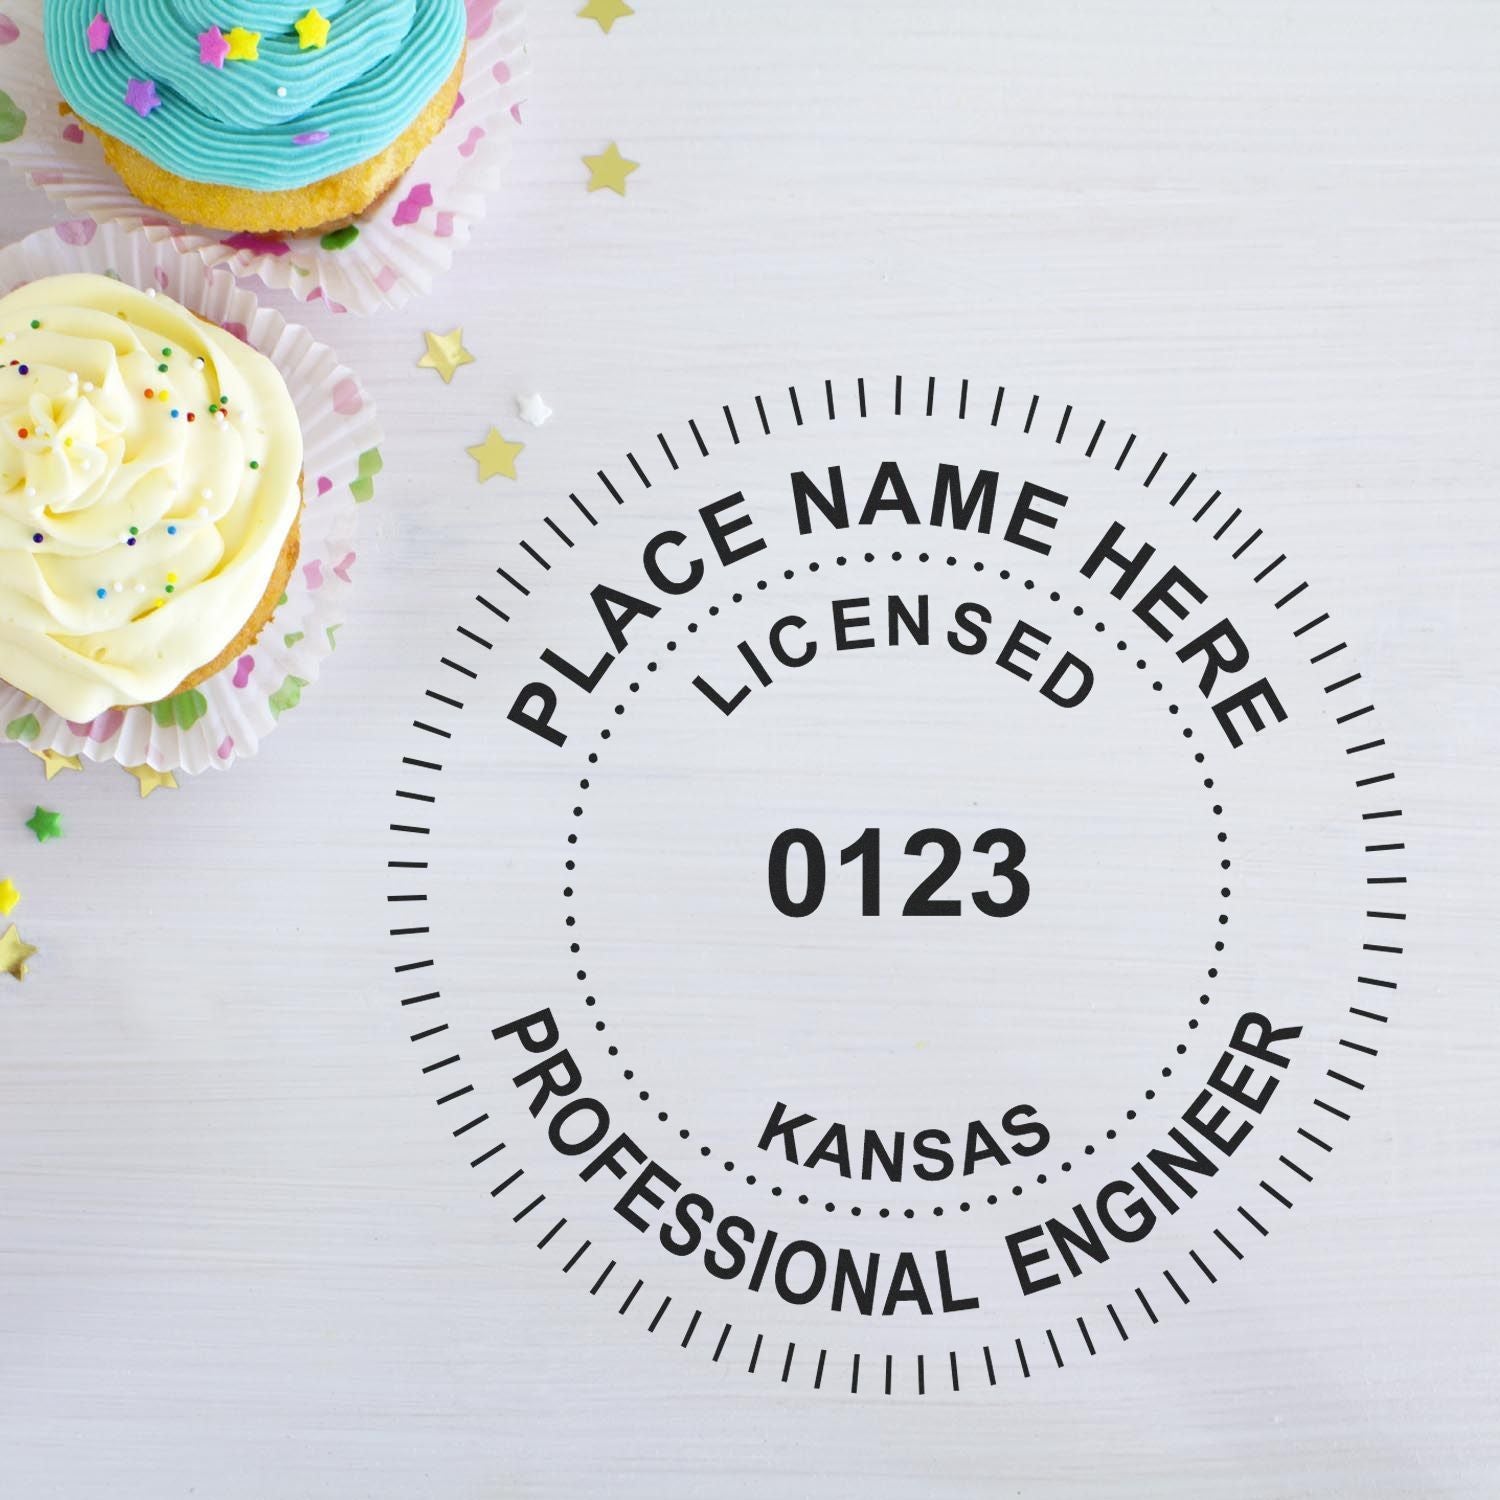 Unlocking Opportunities: The Kansas Professional Engineer Stamp Explained Feature Image